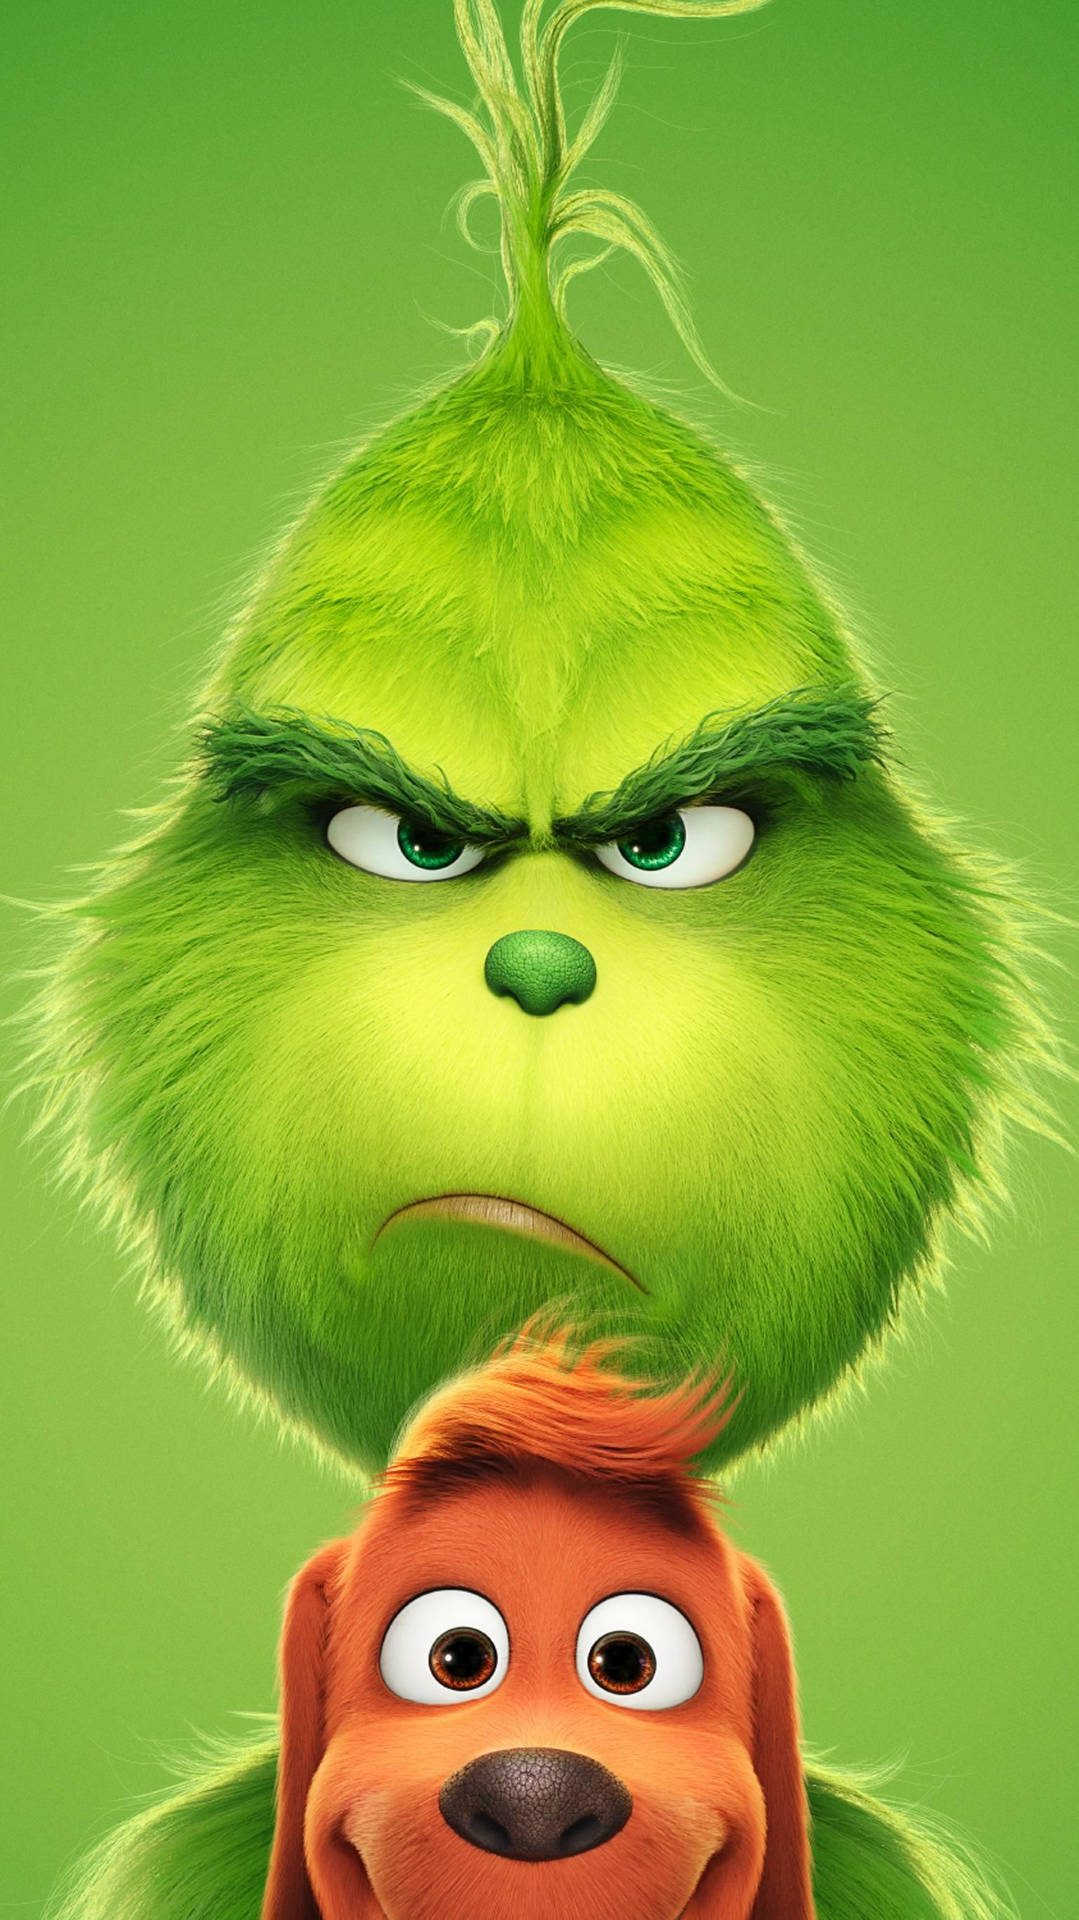 The Grinch Annoyed Background